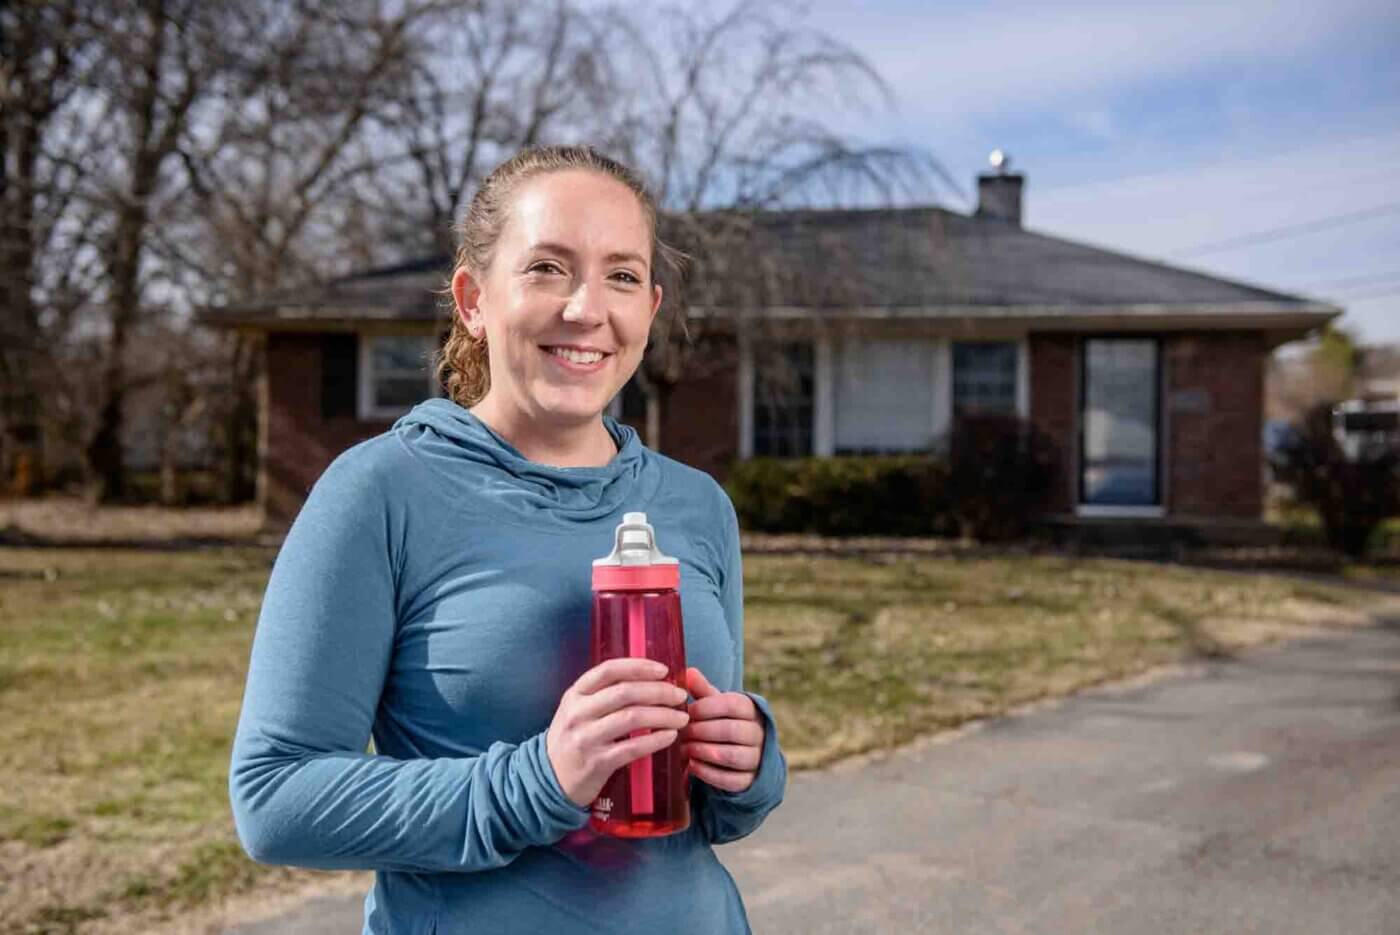 Lindsay Thurman takes care of the dogs at home before going on a run in Cherokee Park Saturday, Feb. 6, 2021, in Louisville, Ky. A return to running was possible for Thurman after a medication change following a 2008 idiopathic pulmonary arterial hypertension (PAH) diagnosis made her breathe easy again.